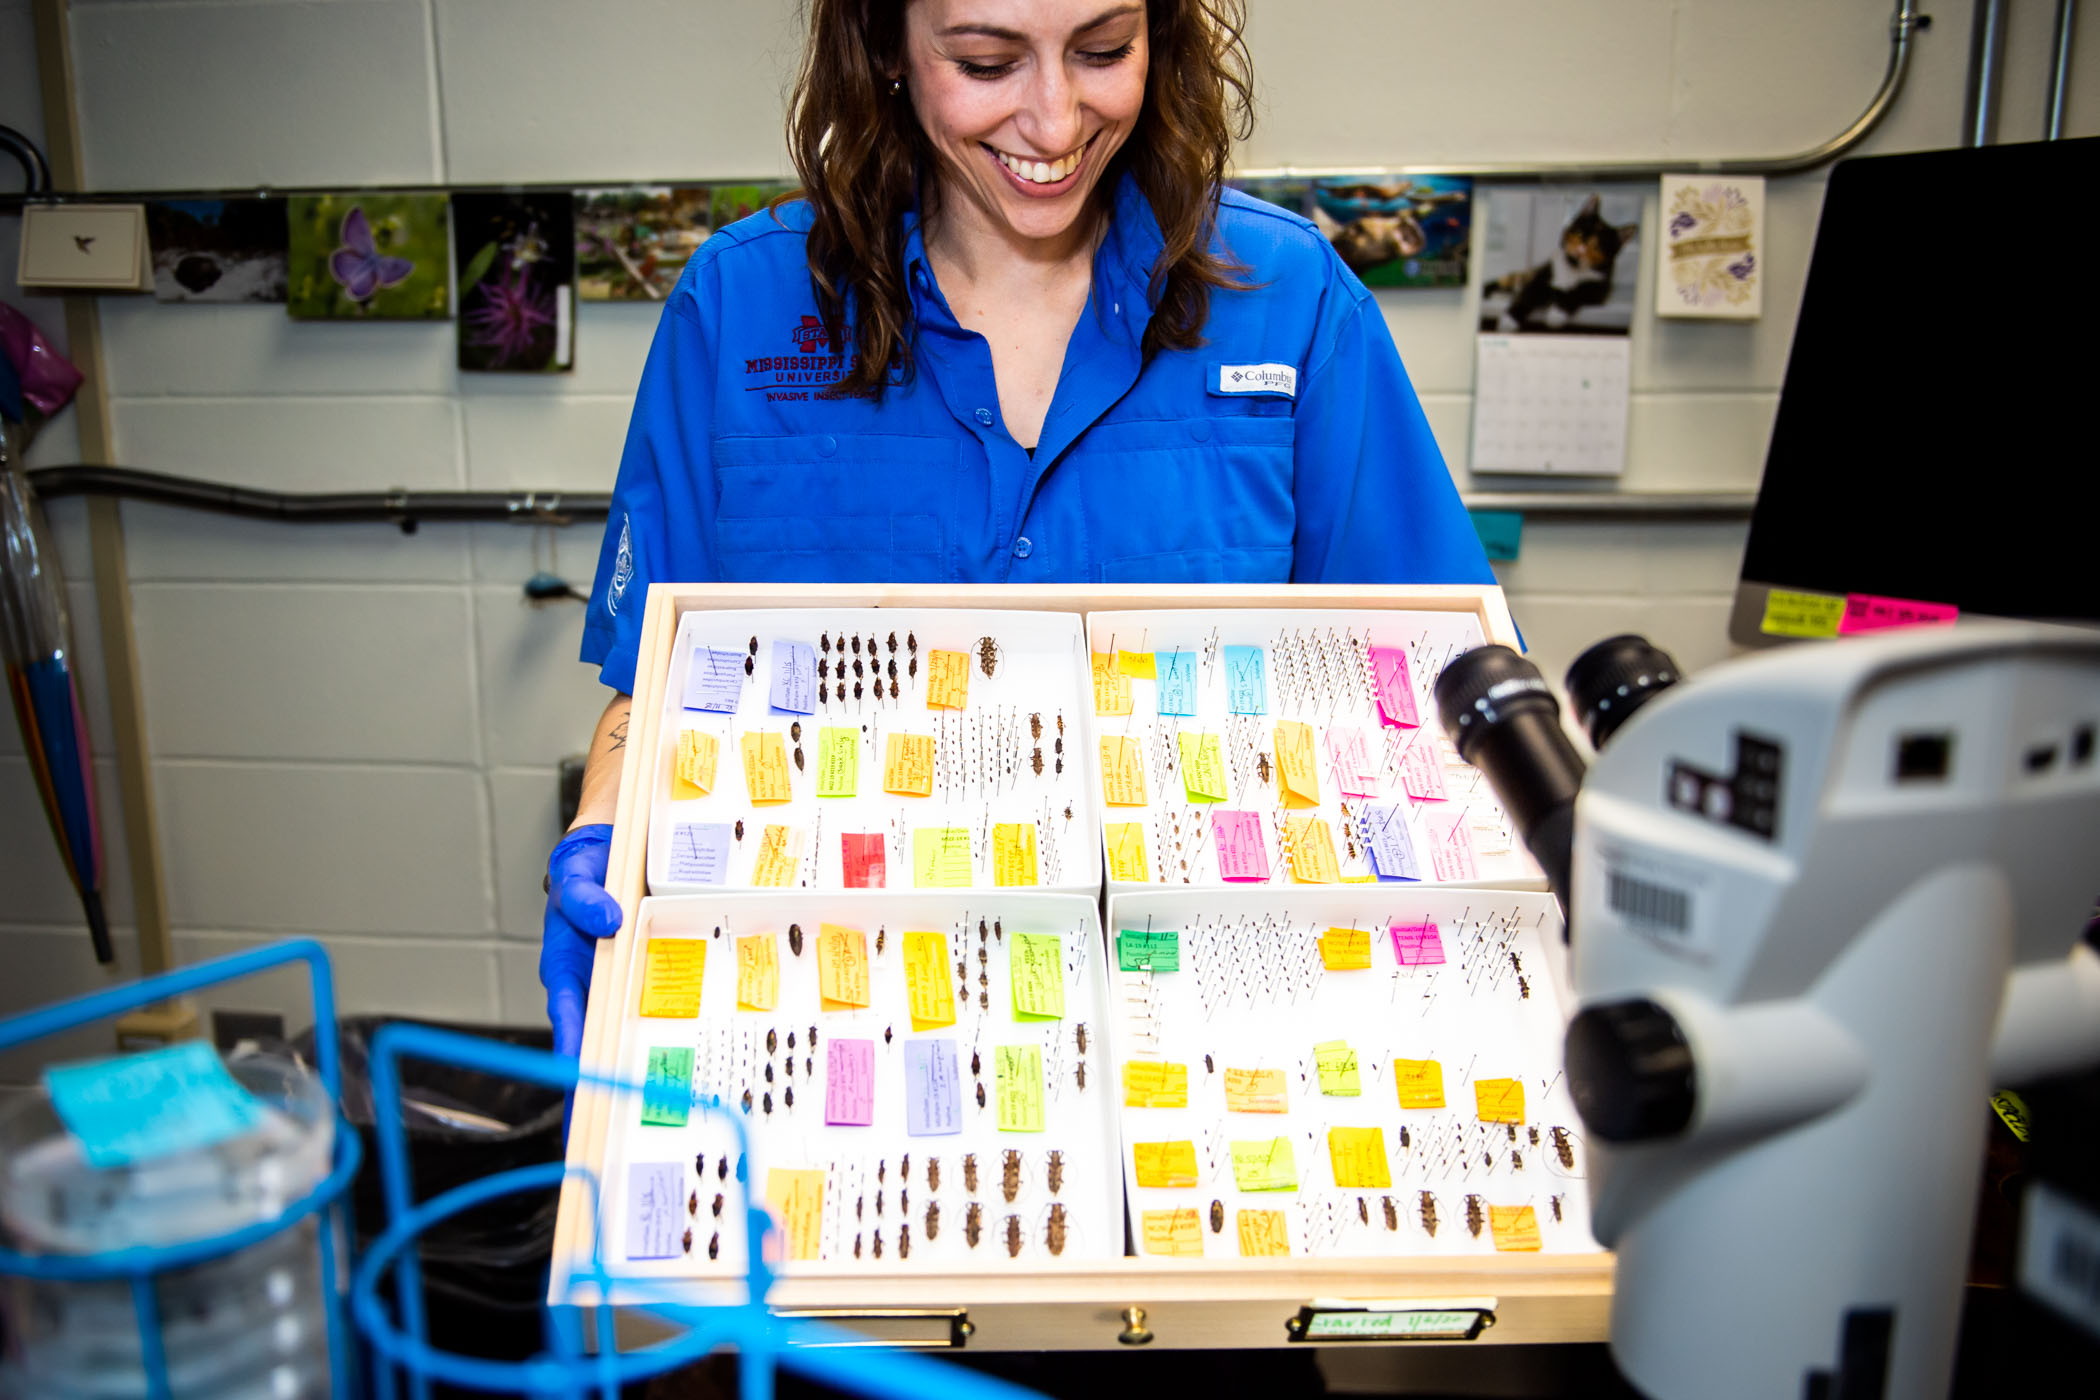 Megan Gaulke, a lab technician at MSU&#039;s Department of Entomology&#039;s Southeastern Regional Screening Center, displays a small fraction of the nearly 18,000 yearly sampled invasive species of insects she and fellow team members have sampled across 13 U.S. states.